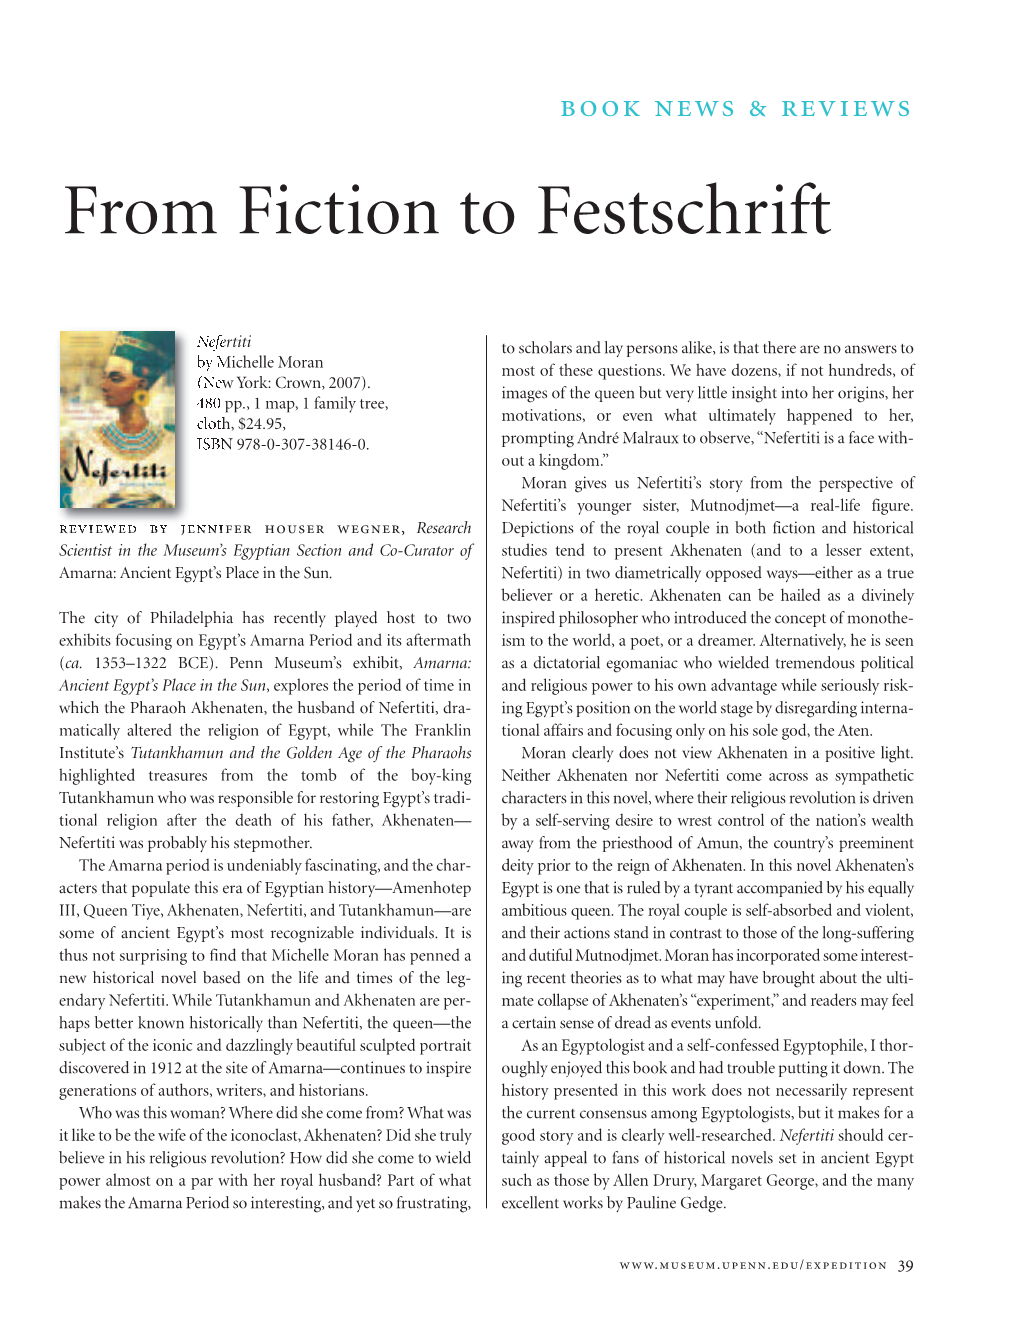 From Fiction to Festschrift